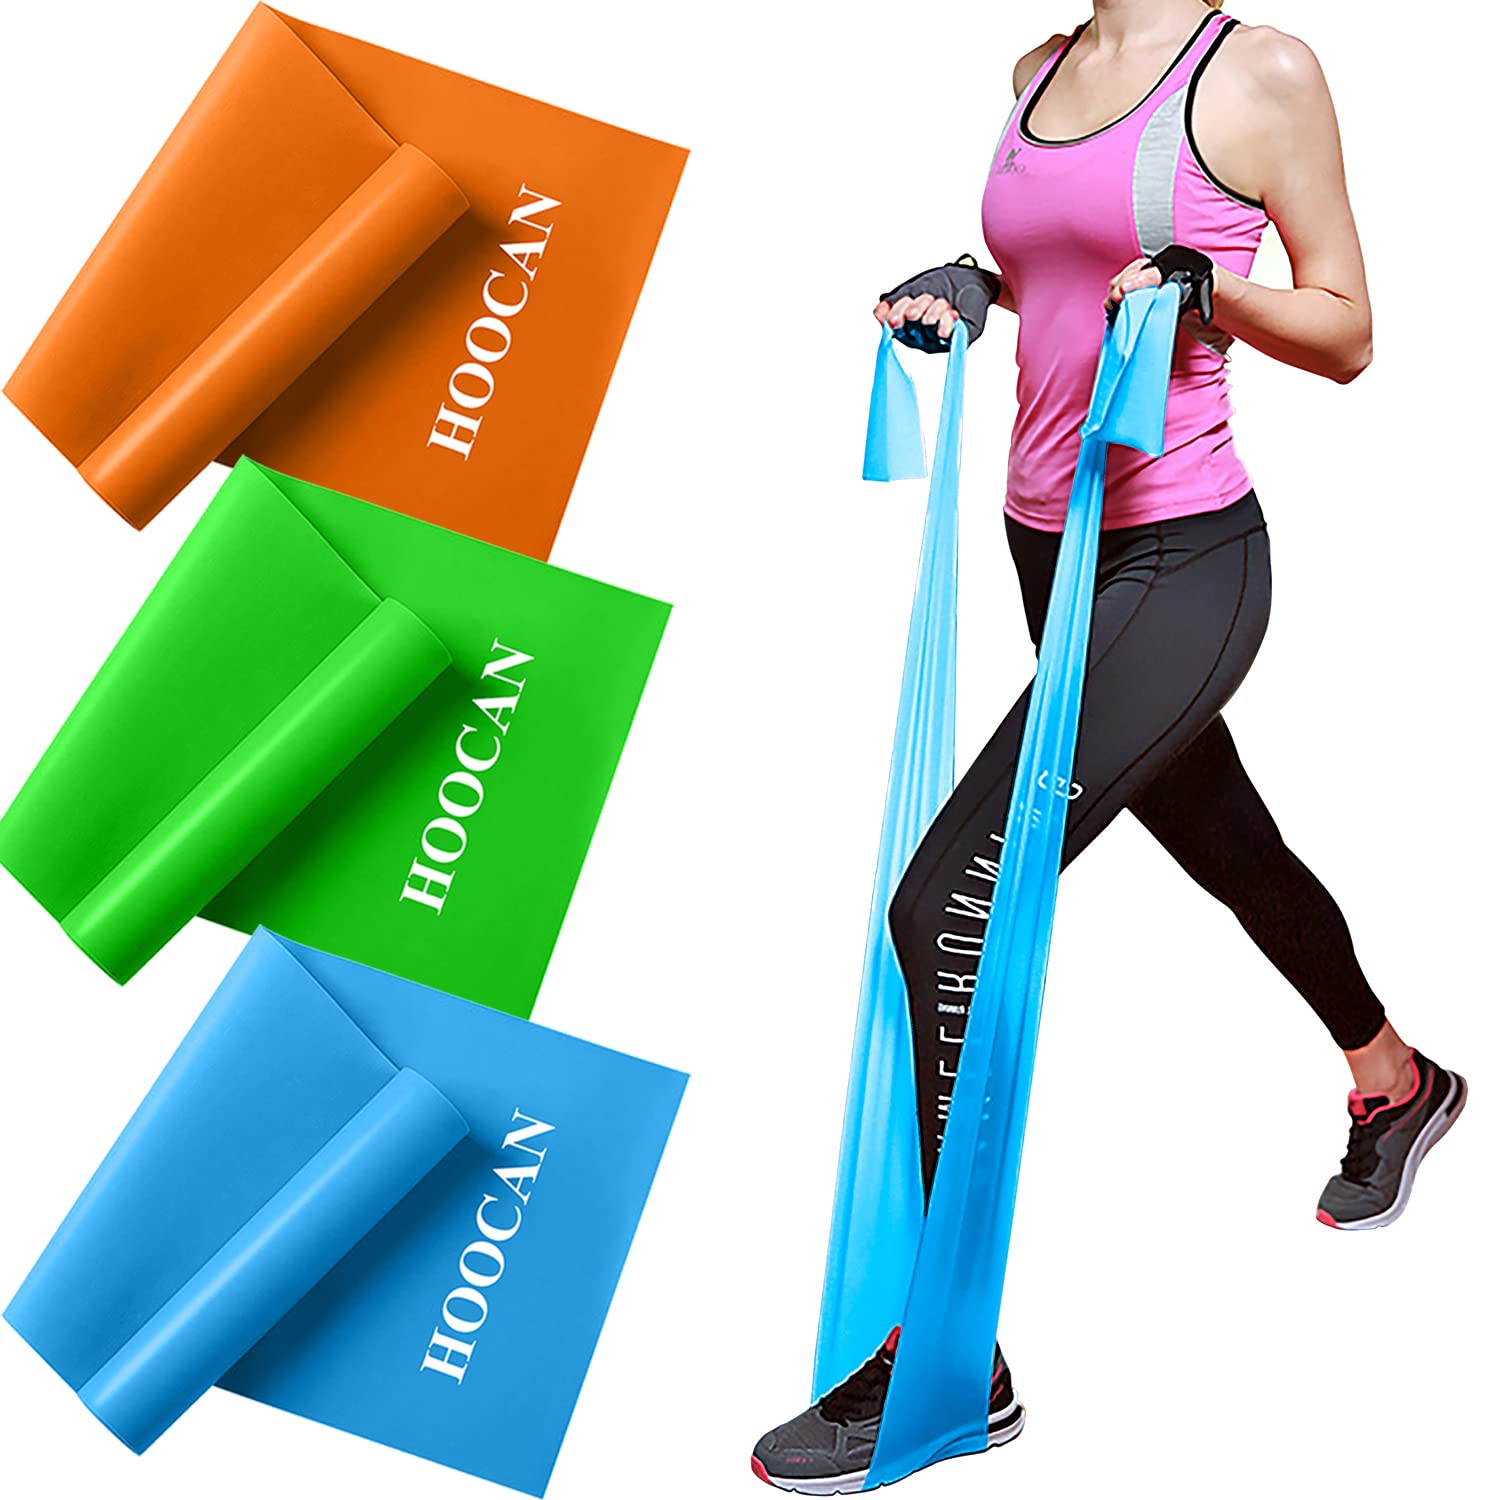 Hoocan Resistance Bands Elastic Exercise Bands Set for Recovery